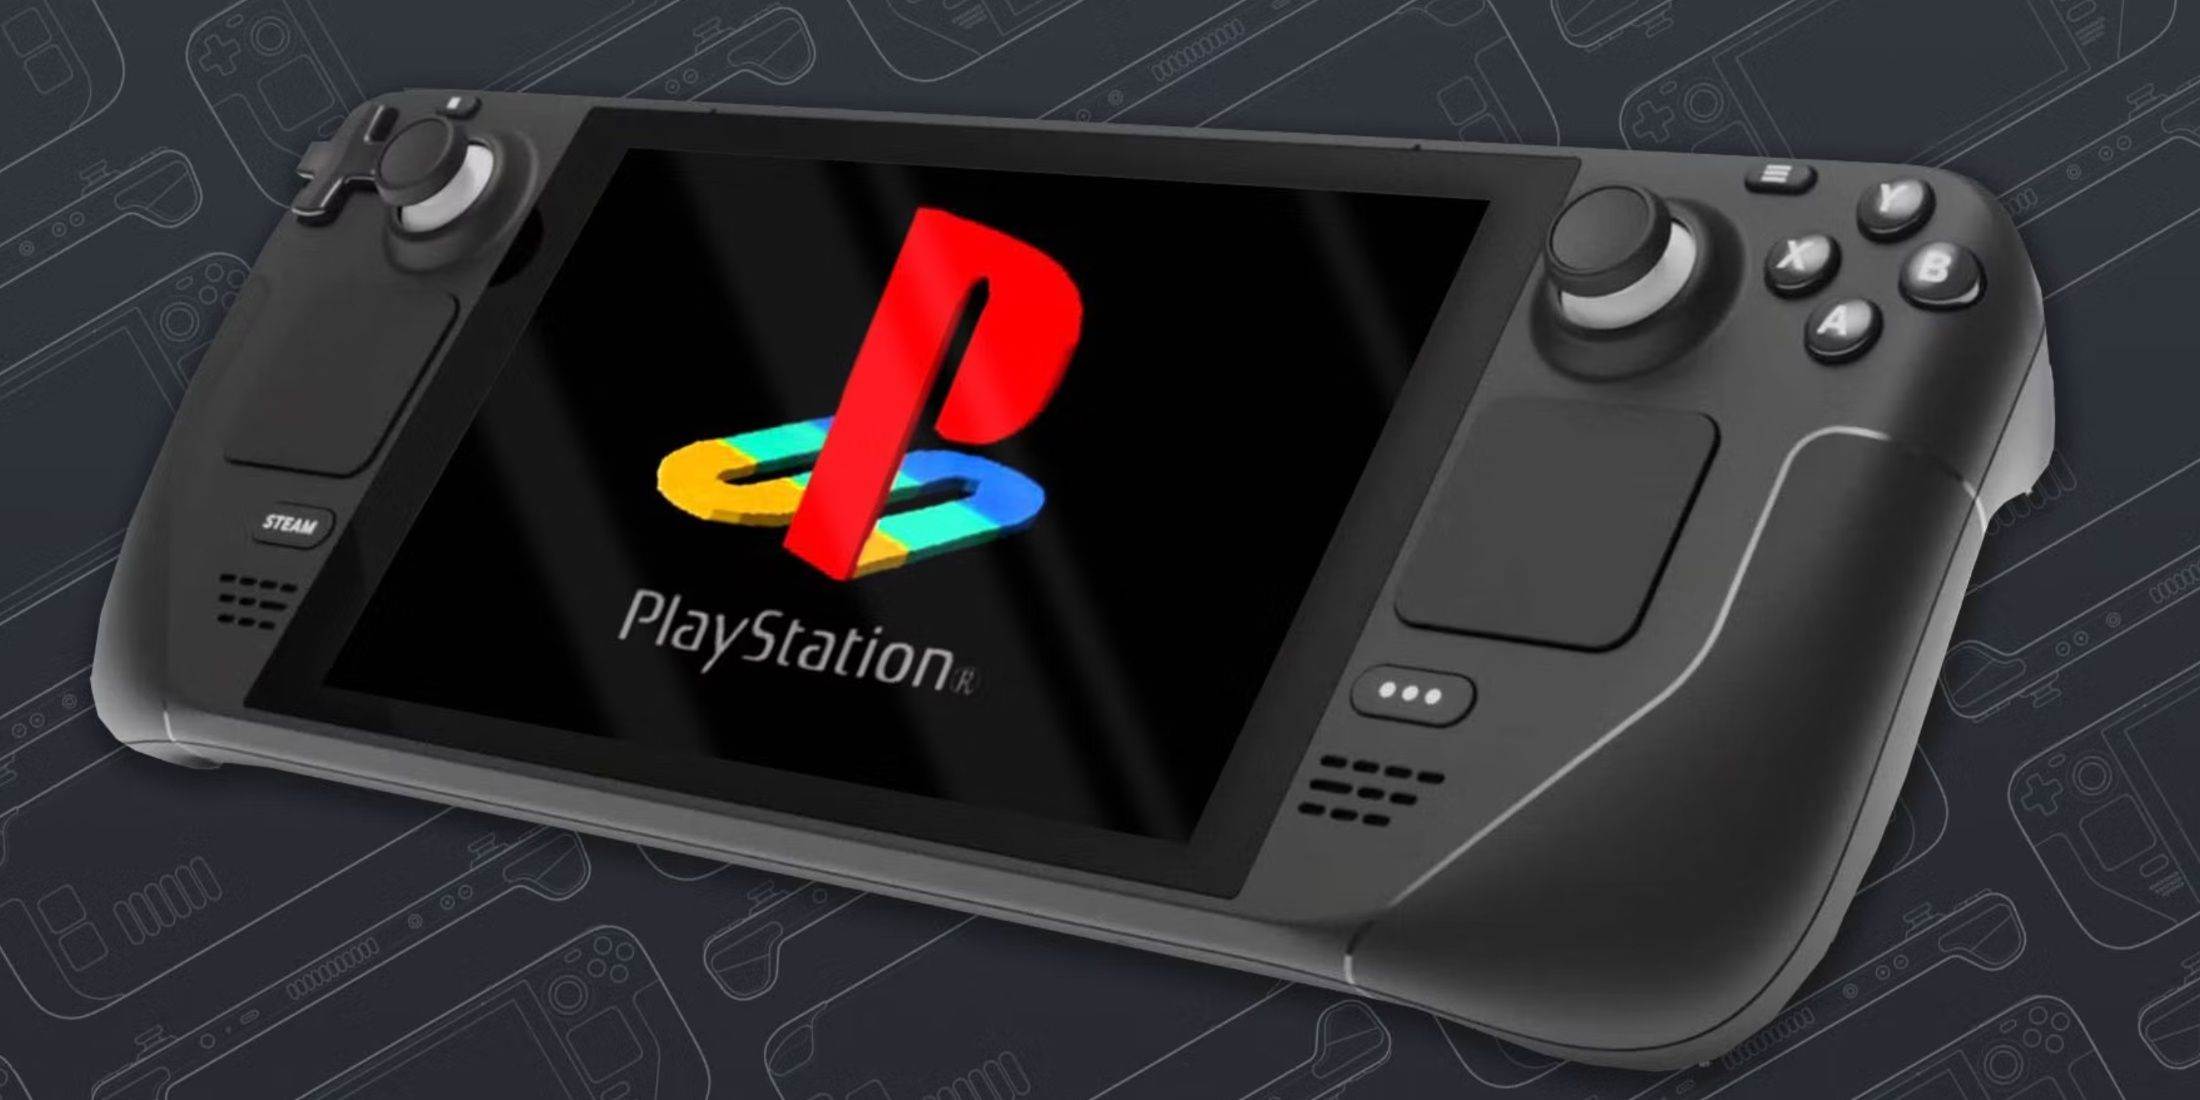 A Steam Deck with a PlayStation 1 logo on the screen